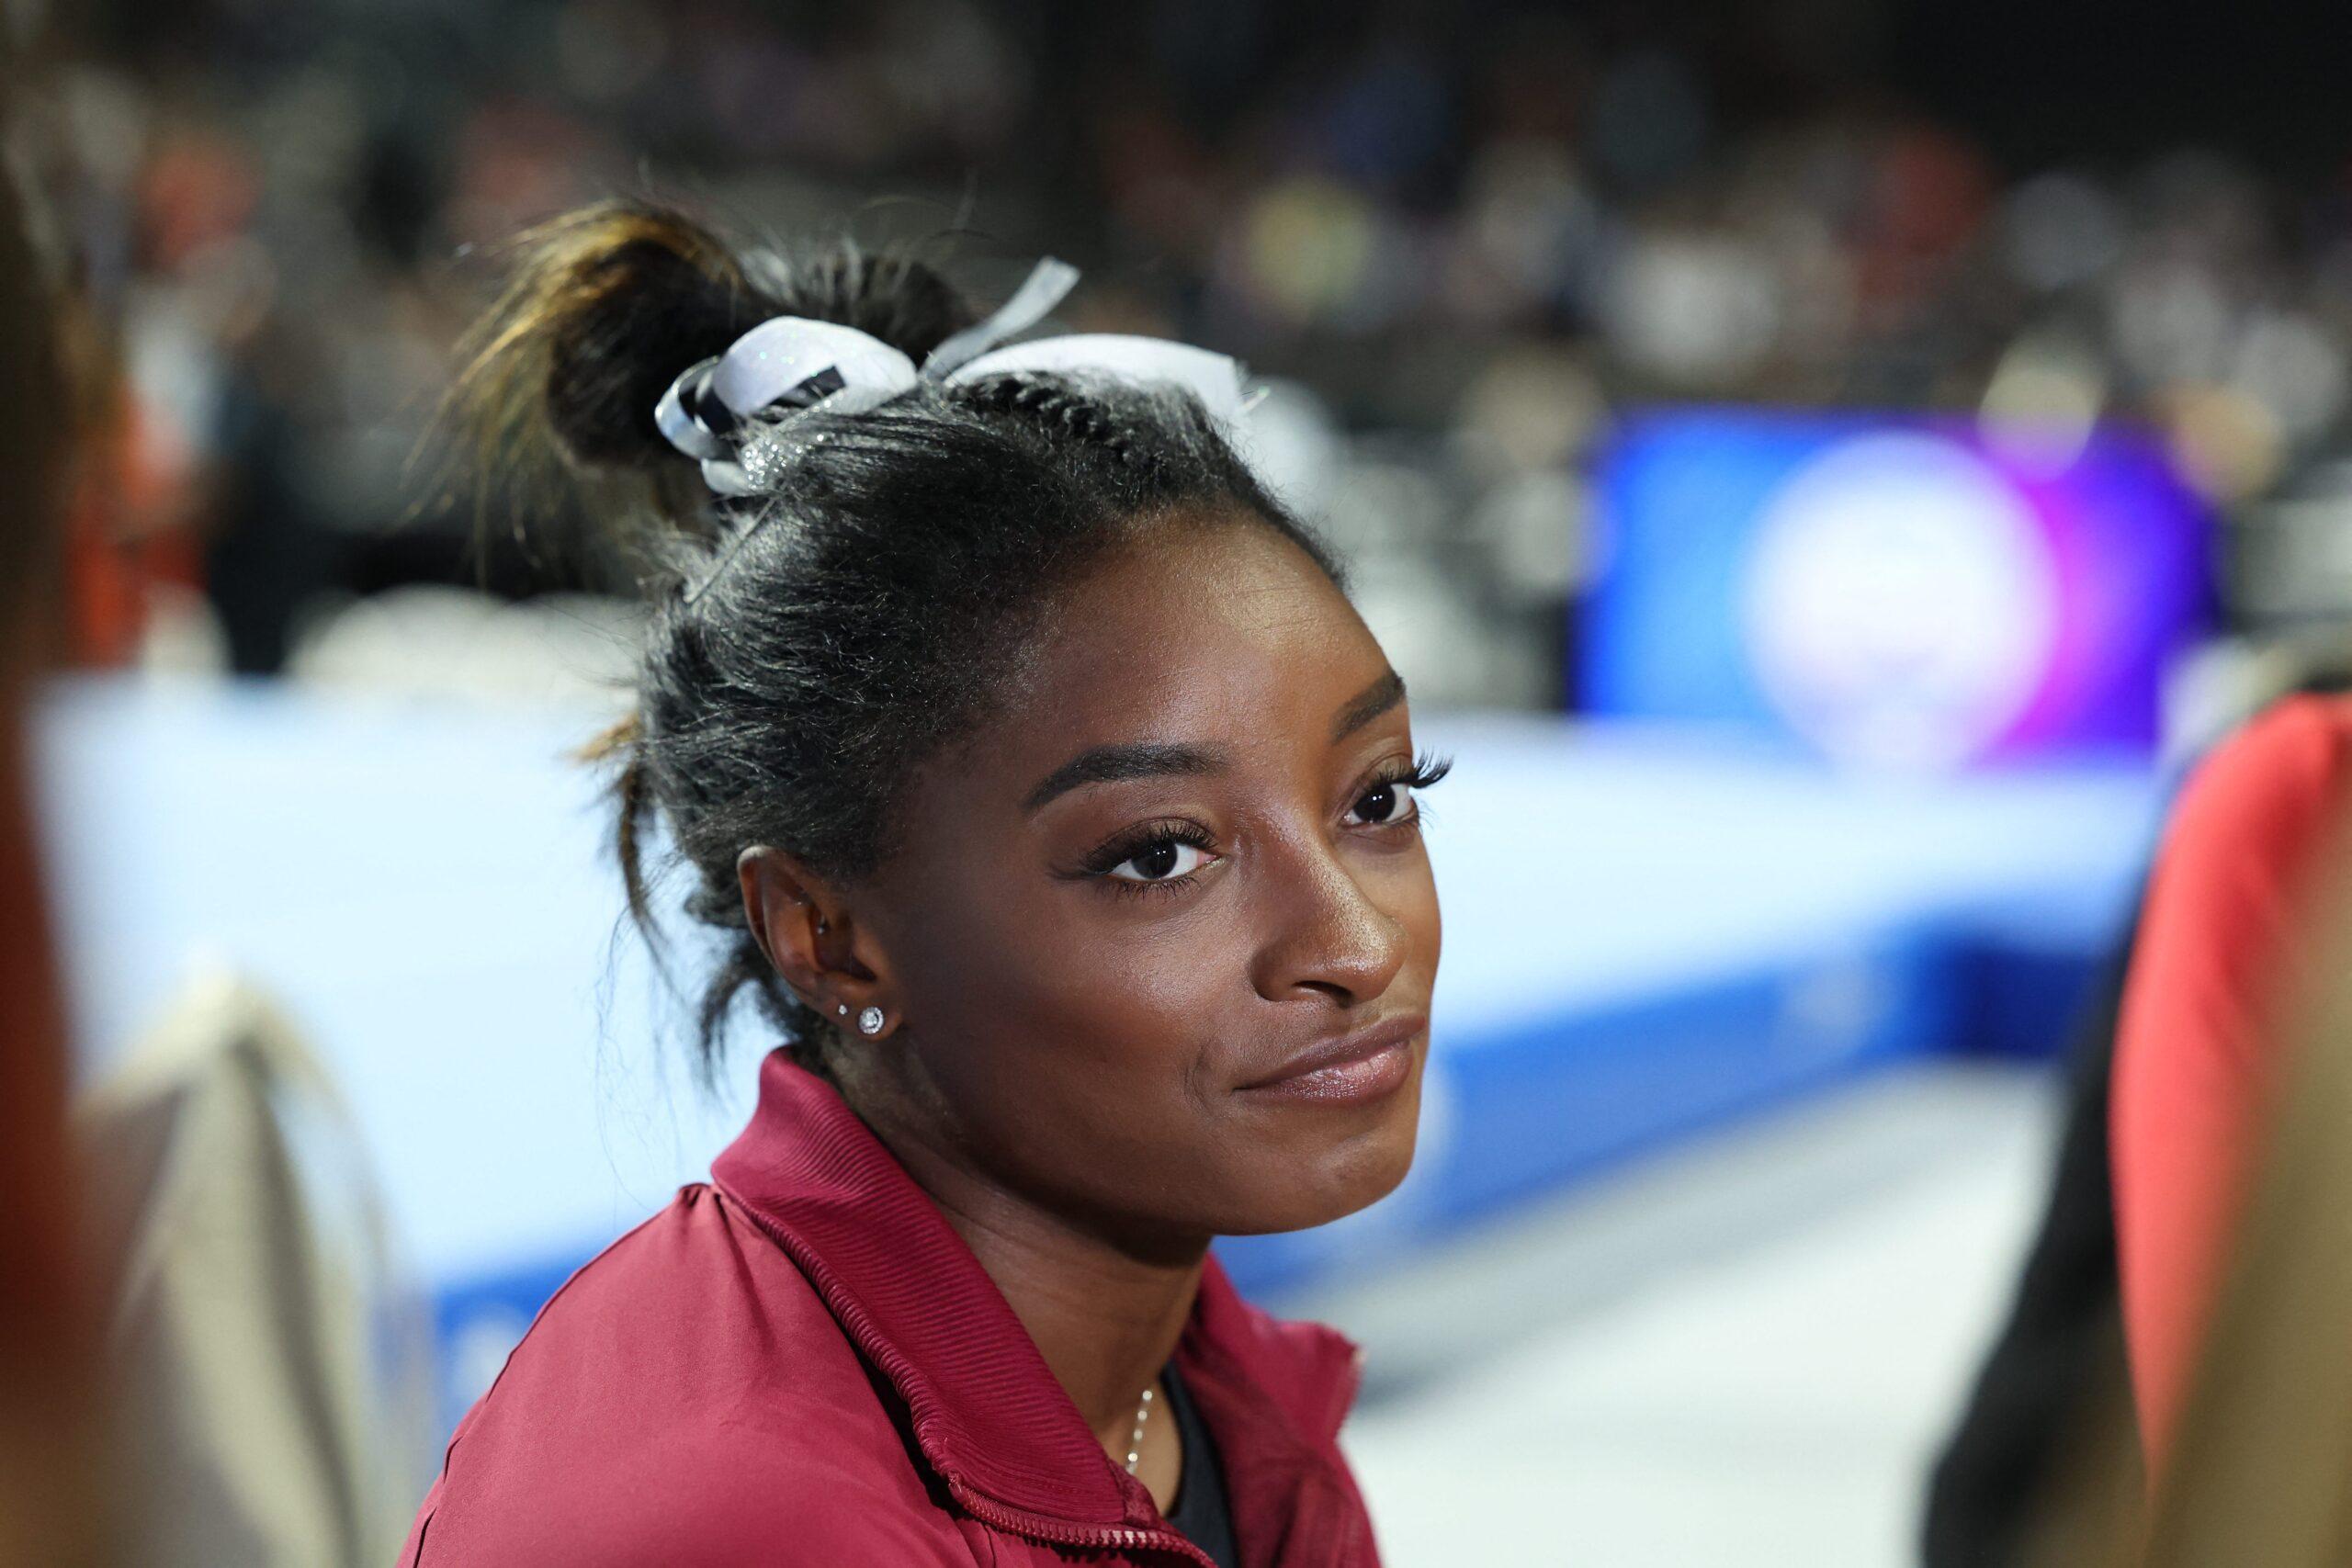 Simone Biles Thought The World 'Hated' Her And Would Be 'Banned From America'